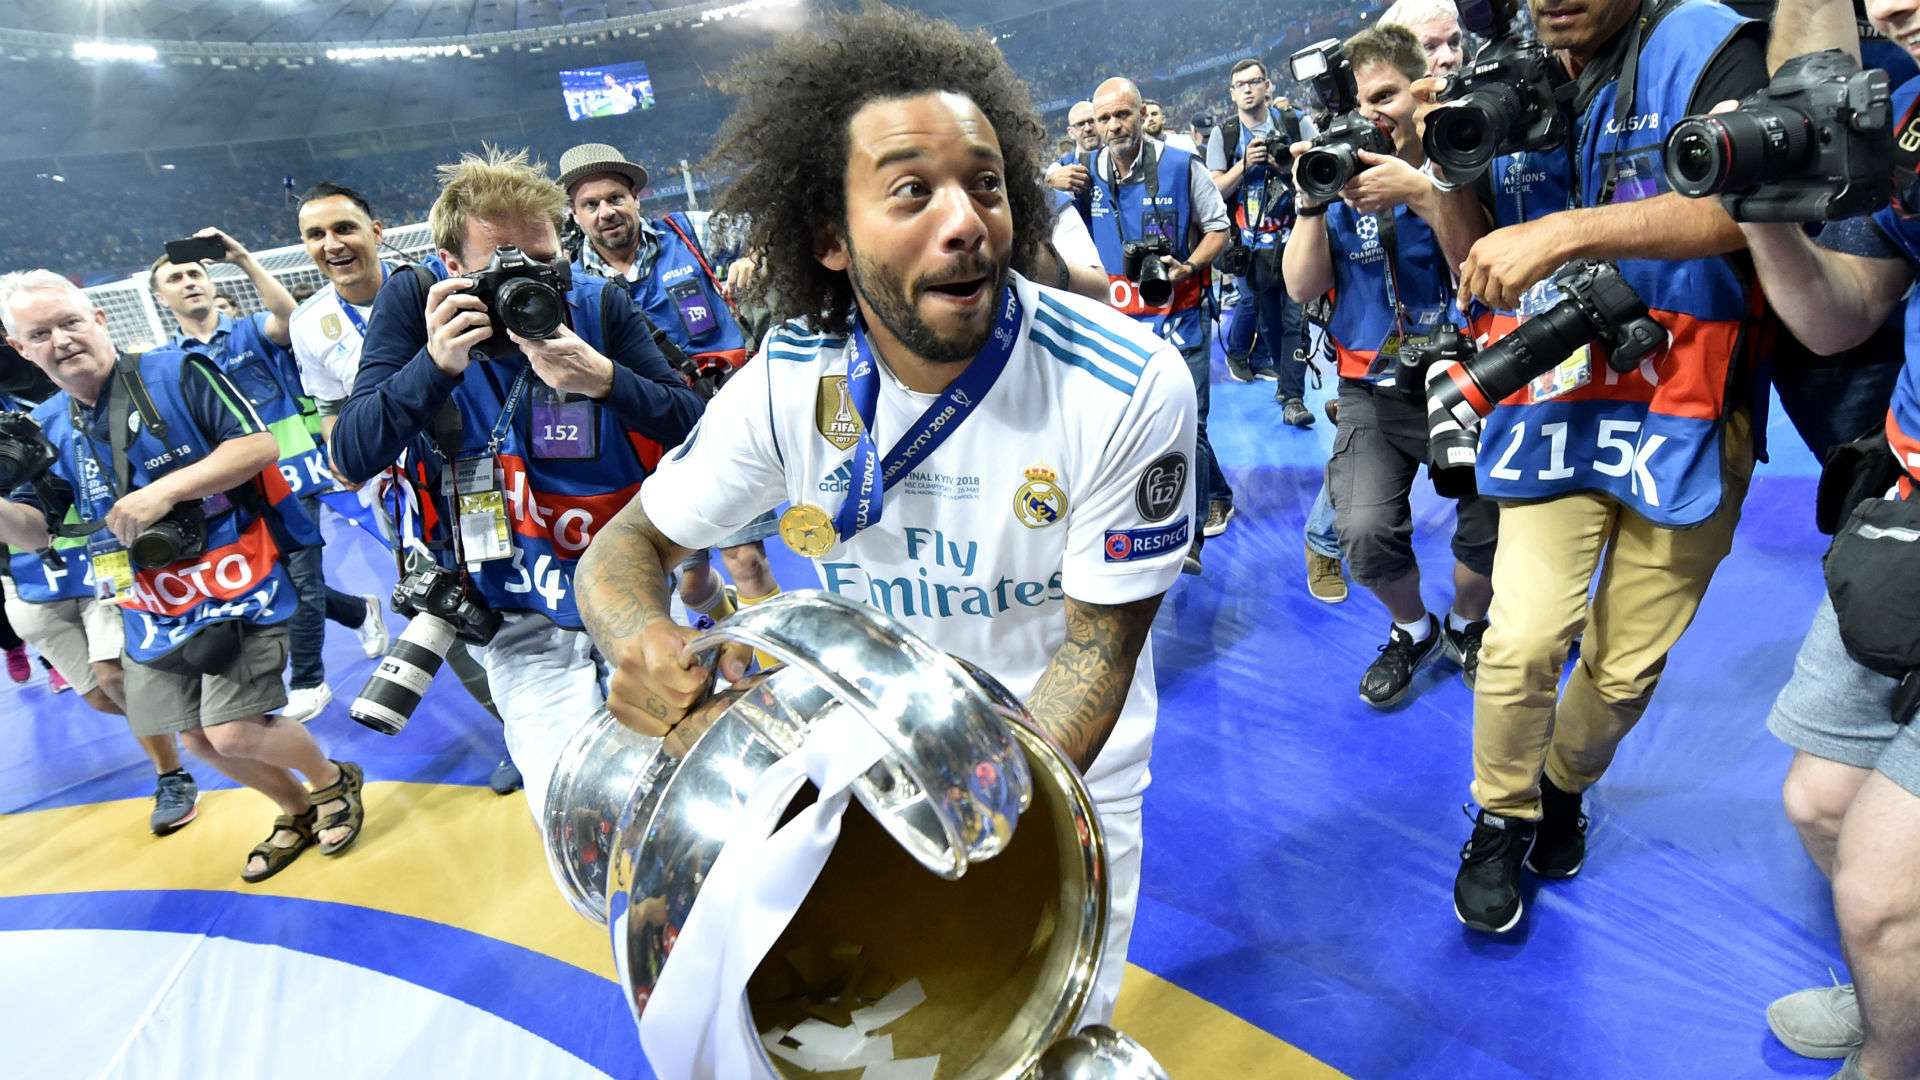 Marcelo Champions League final Real Madrid 26 05 2018